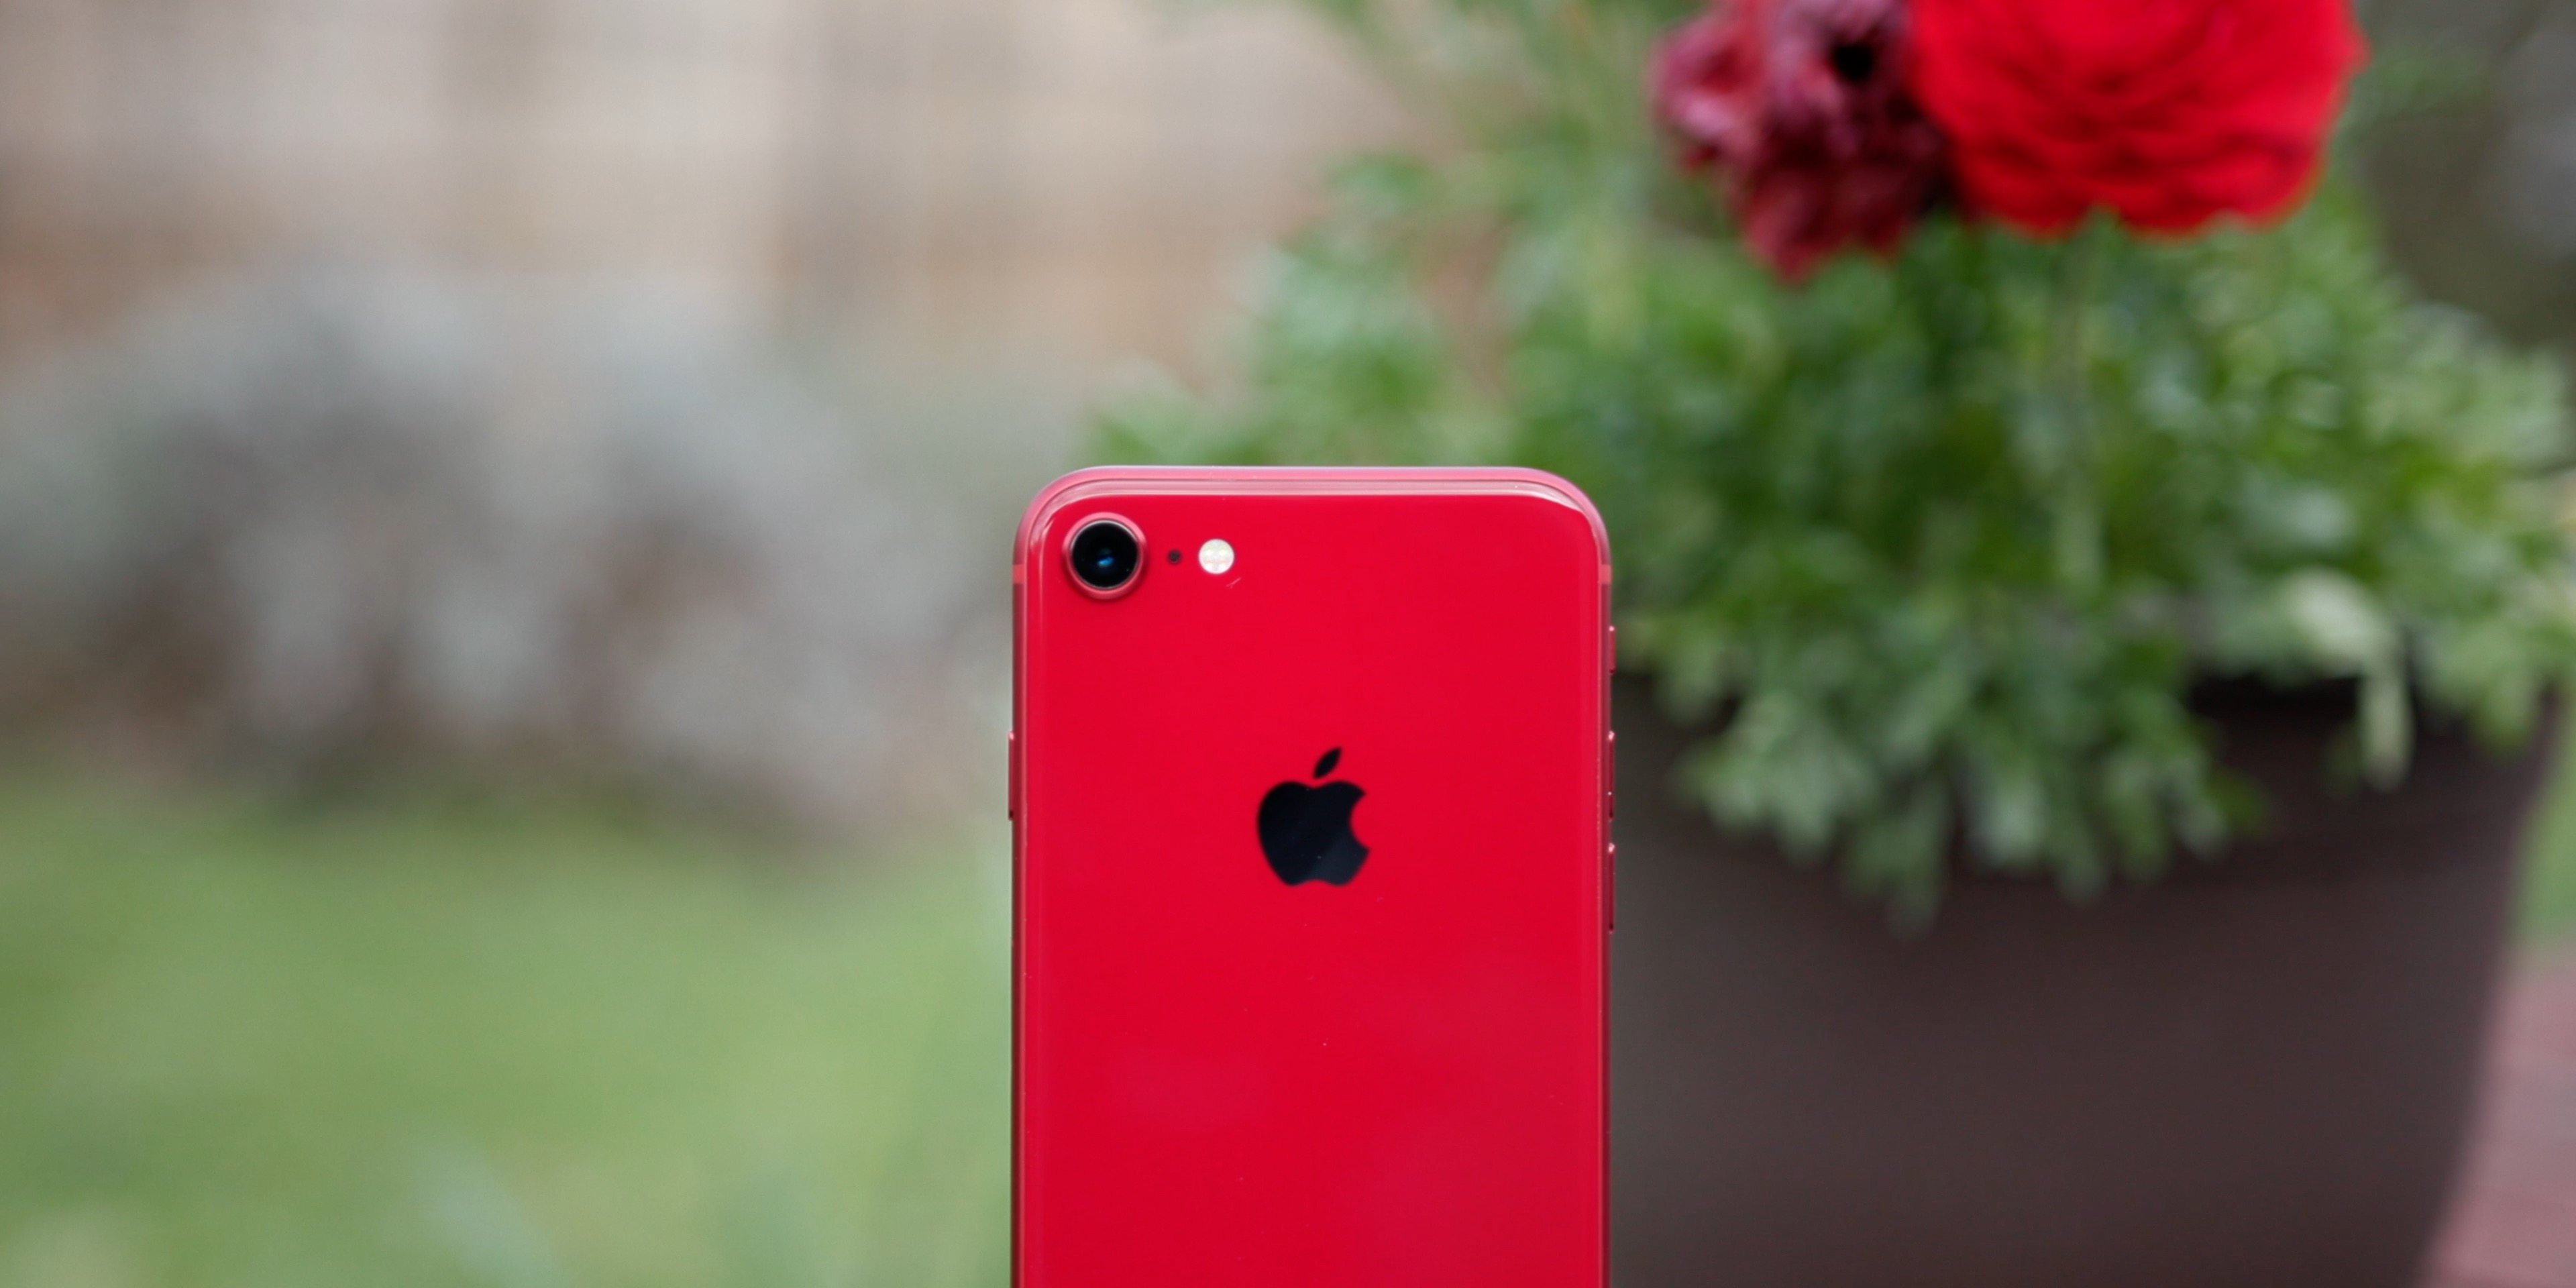 Exclusive Iphone 9 Launch Imminent 2020 Iphone Se In Red White And Black With Up To 256gb